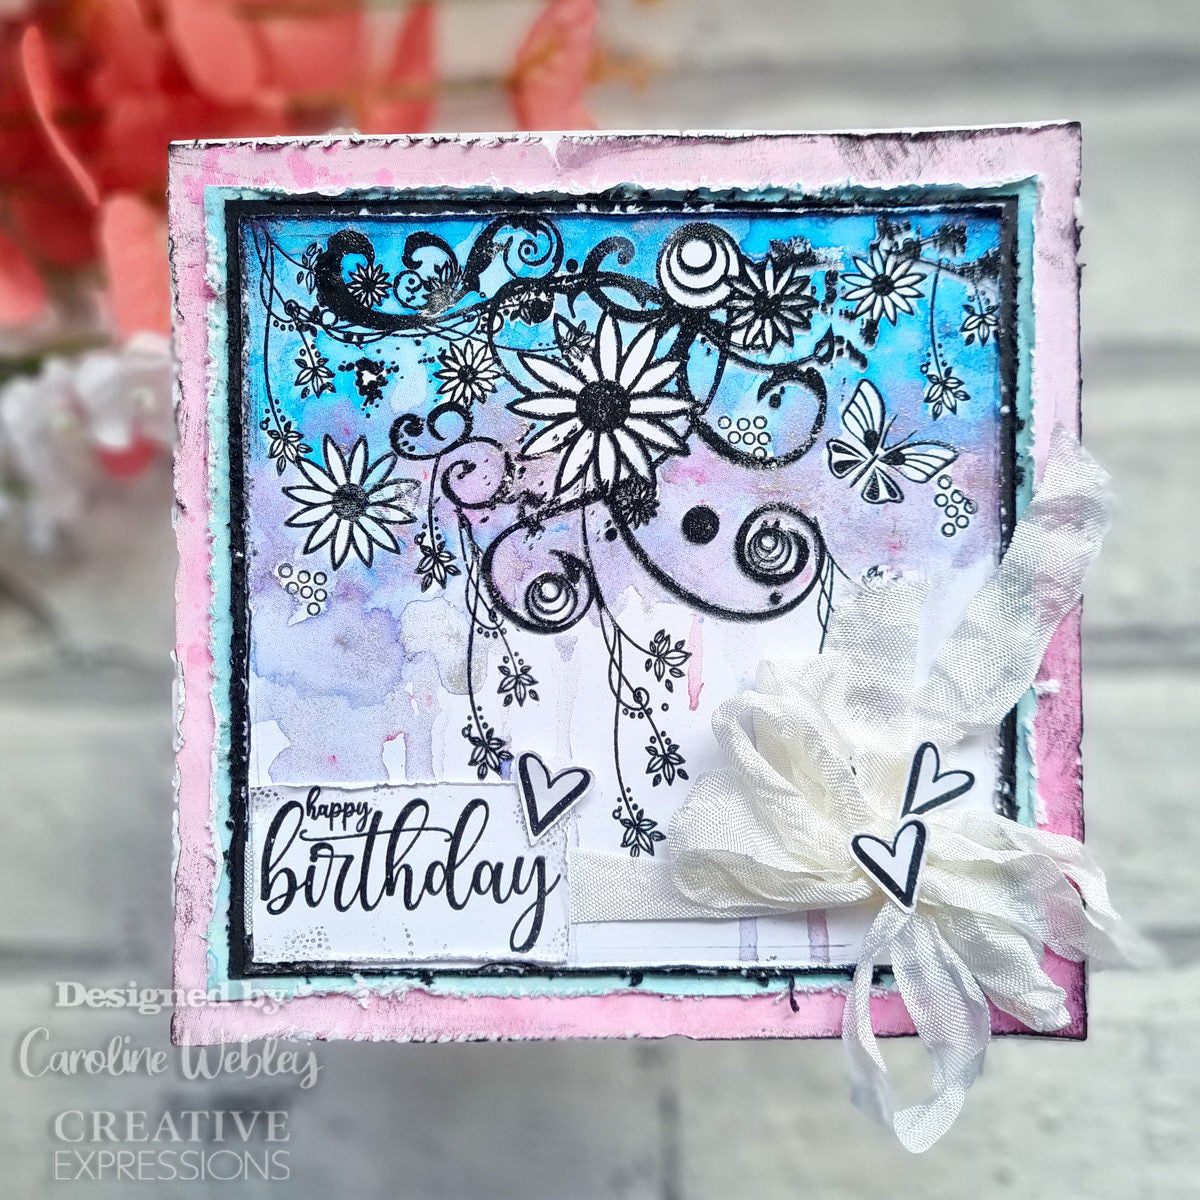 Creative Expressions Designer Boutique Breezy Elements 6 in x 4 in Clear Stamp Set